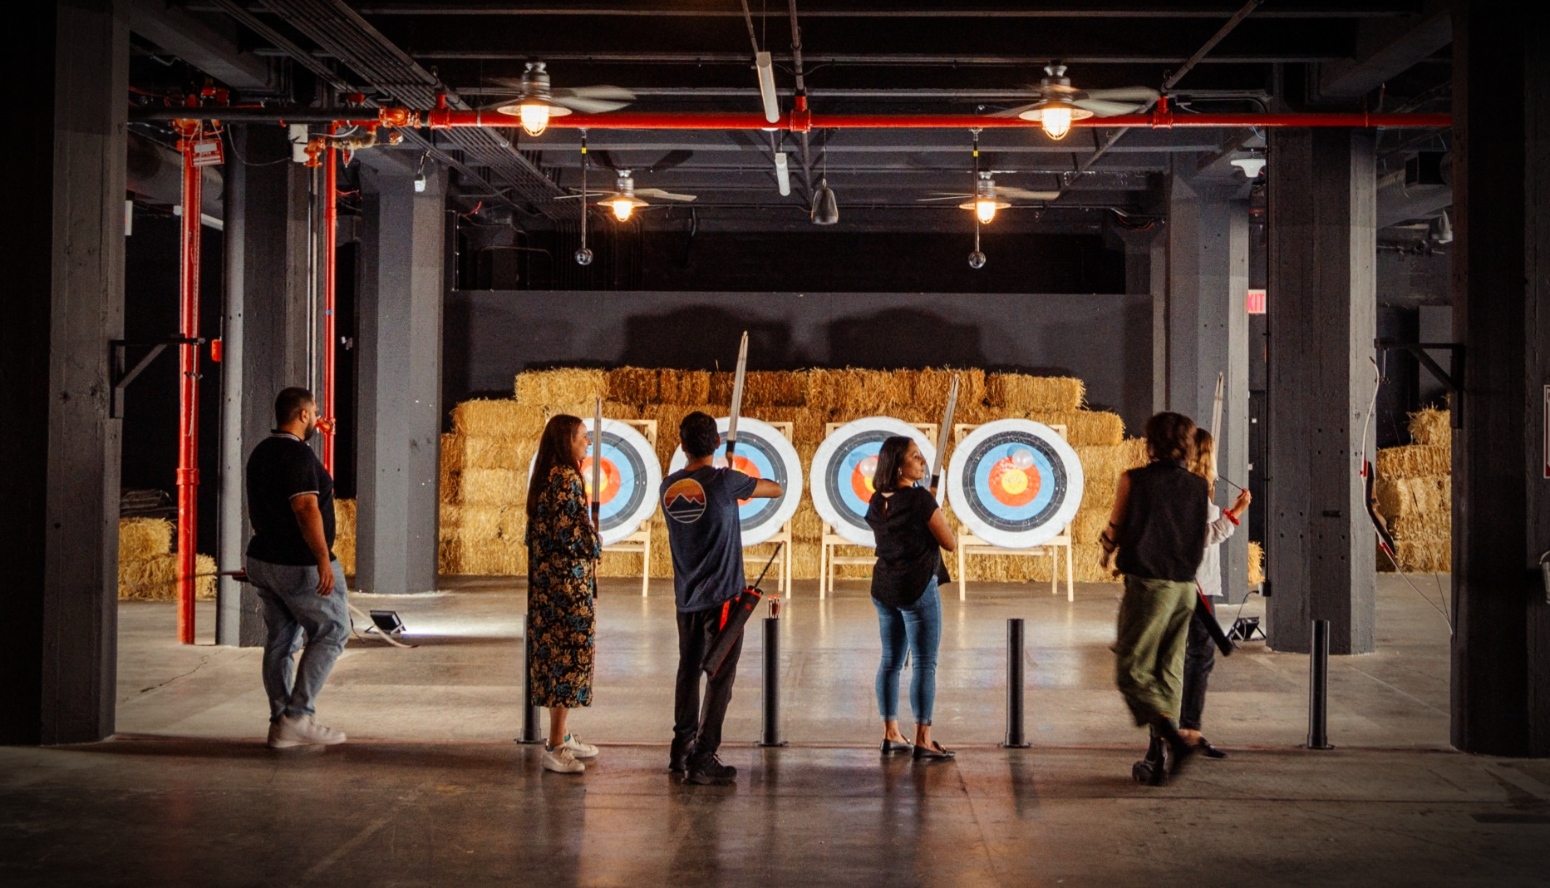 People are doing archery in an event space.